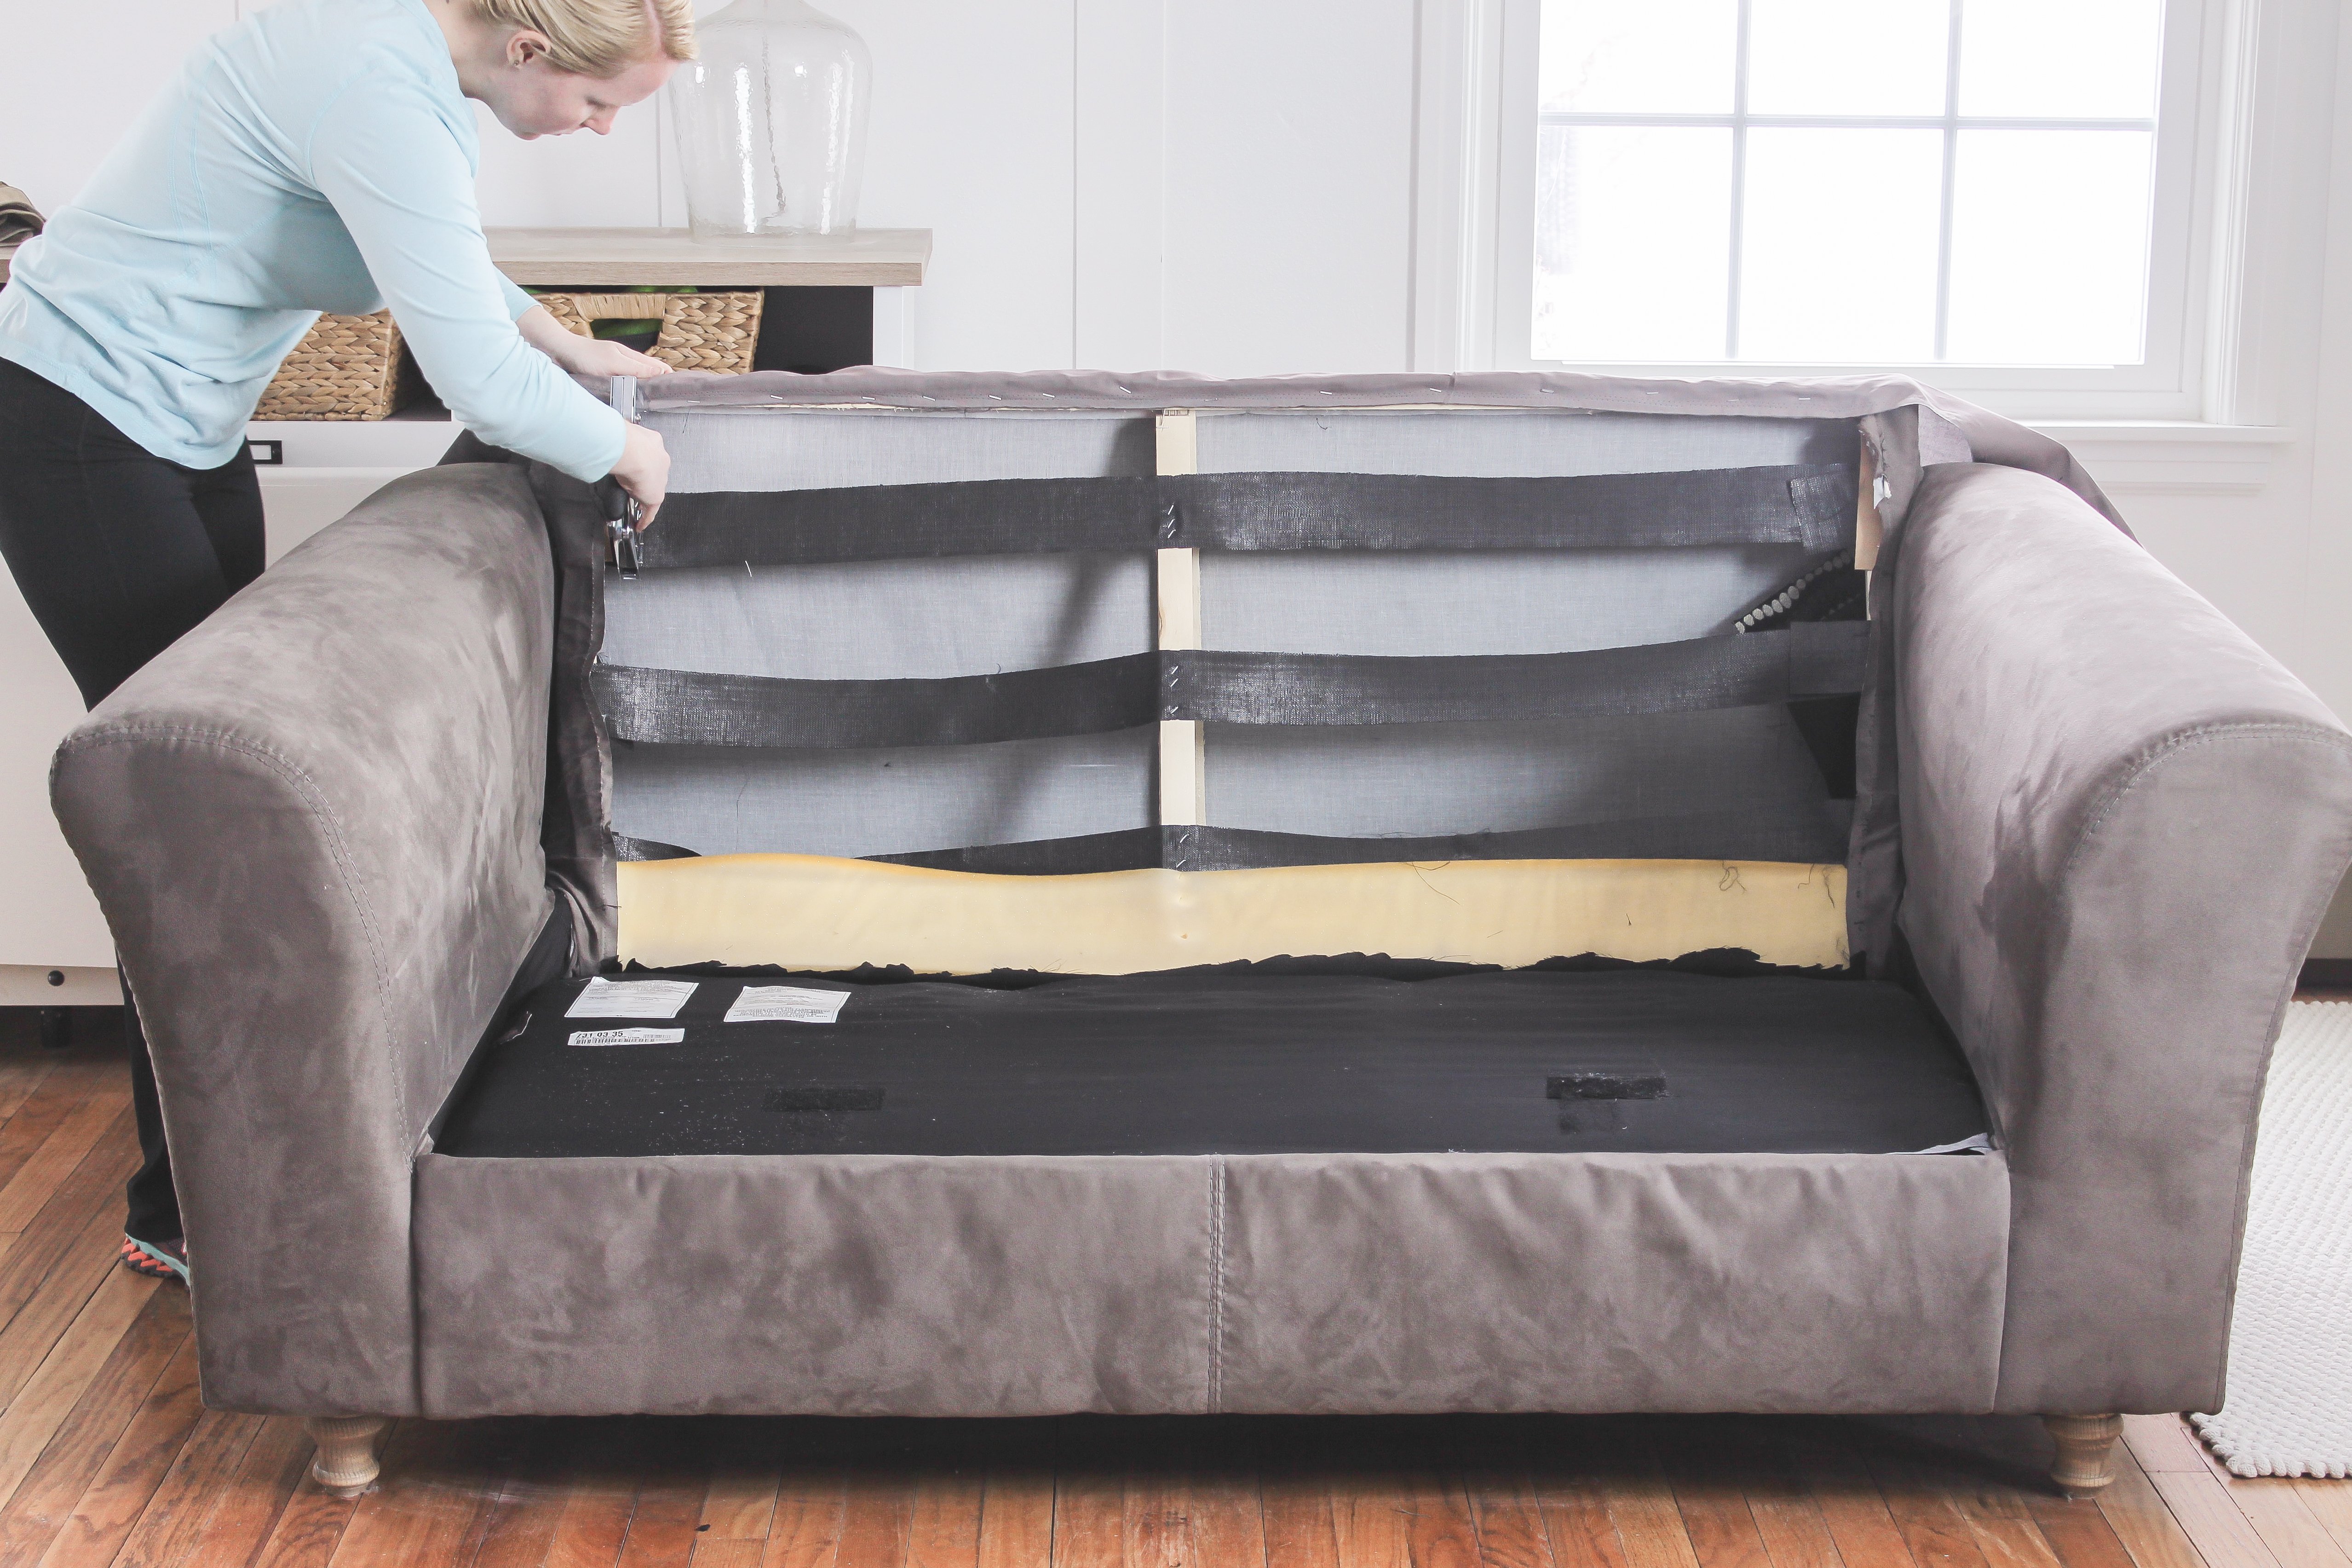 How To Fix A Sagging Couch Re, How To Fix Sofa Cover